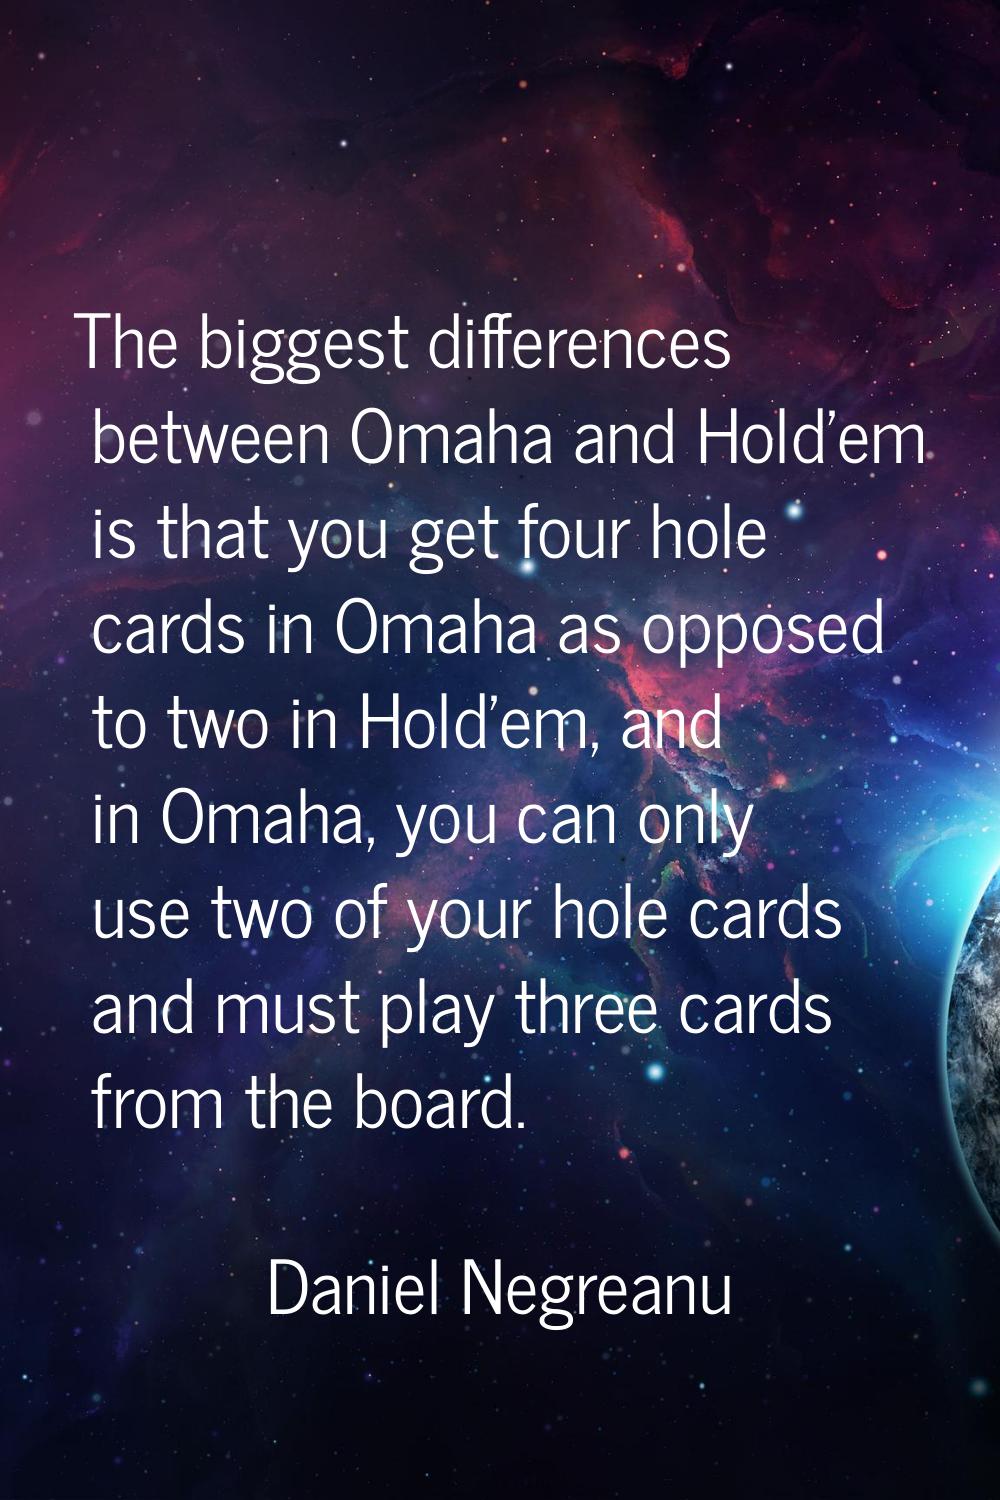 The biggest differences between Omaha and Hold'em is that you get four hole cards in Omaha as oppos